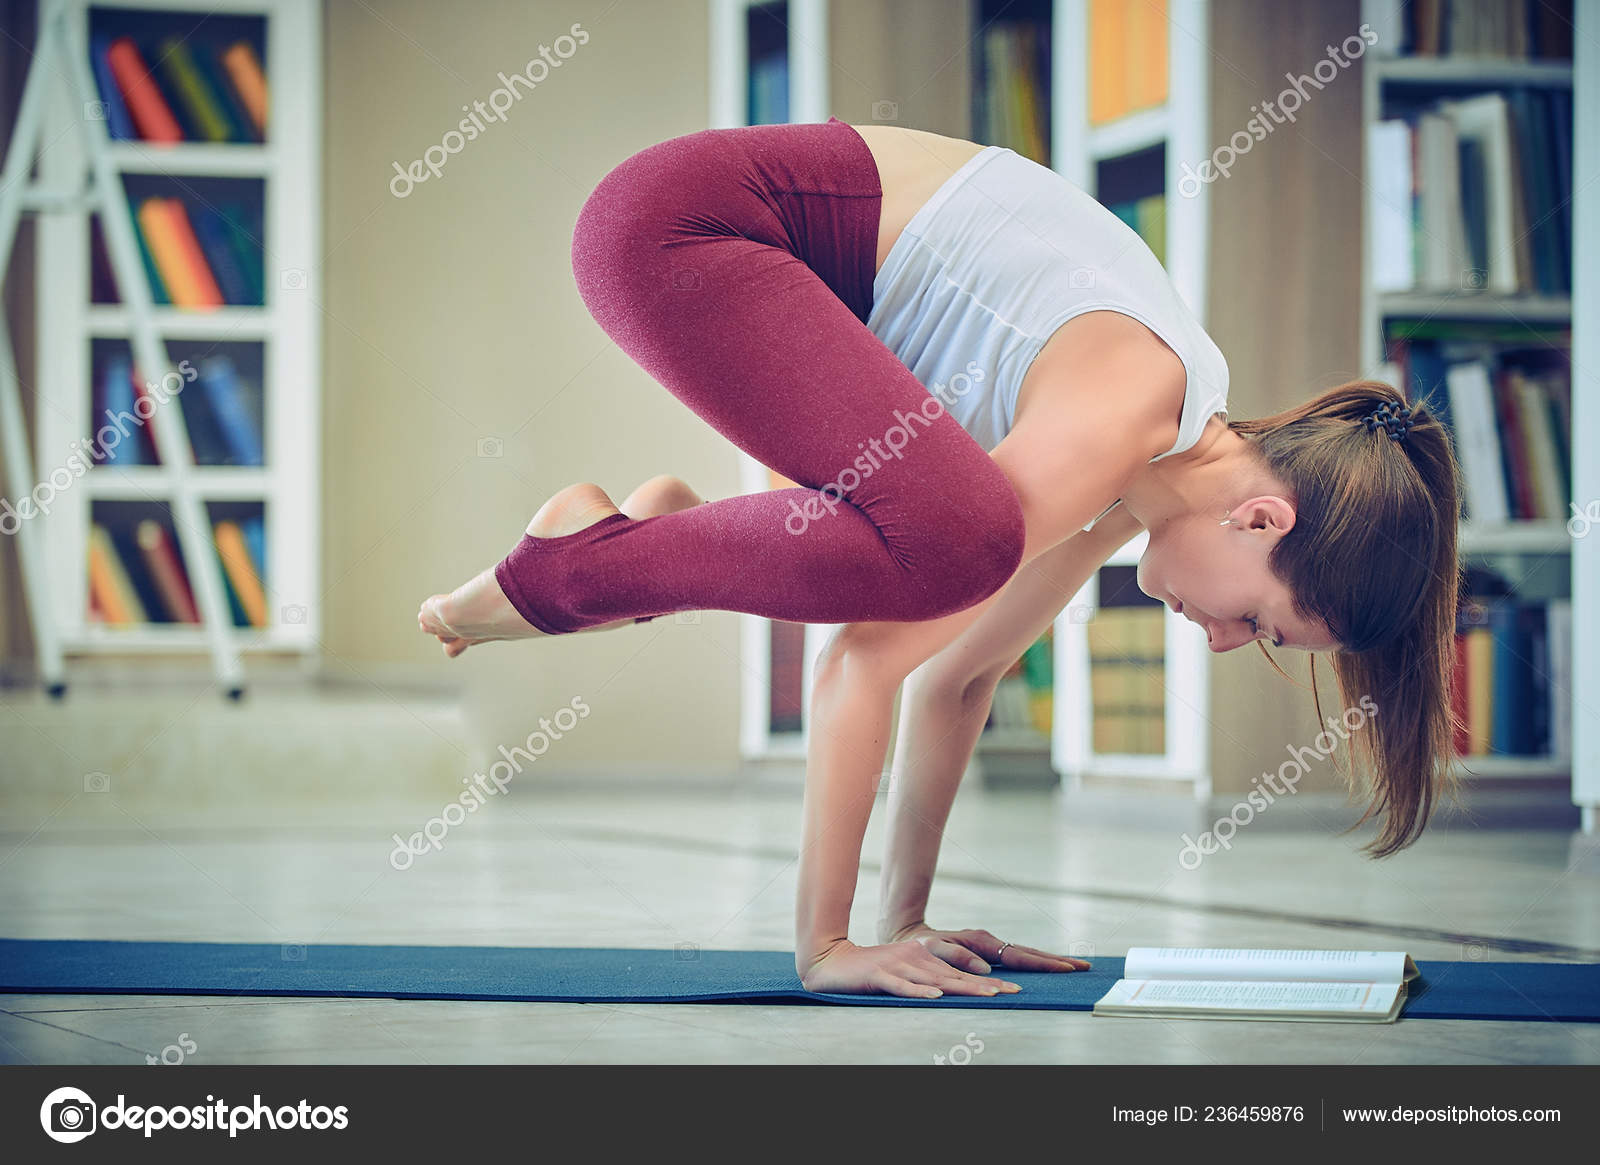 Yoga Pose Library - PURE Online